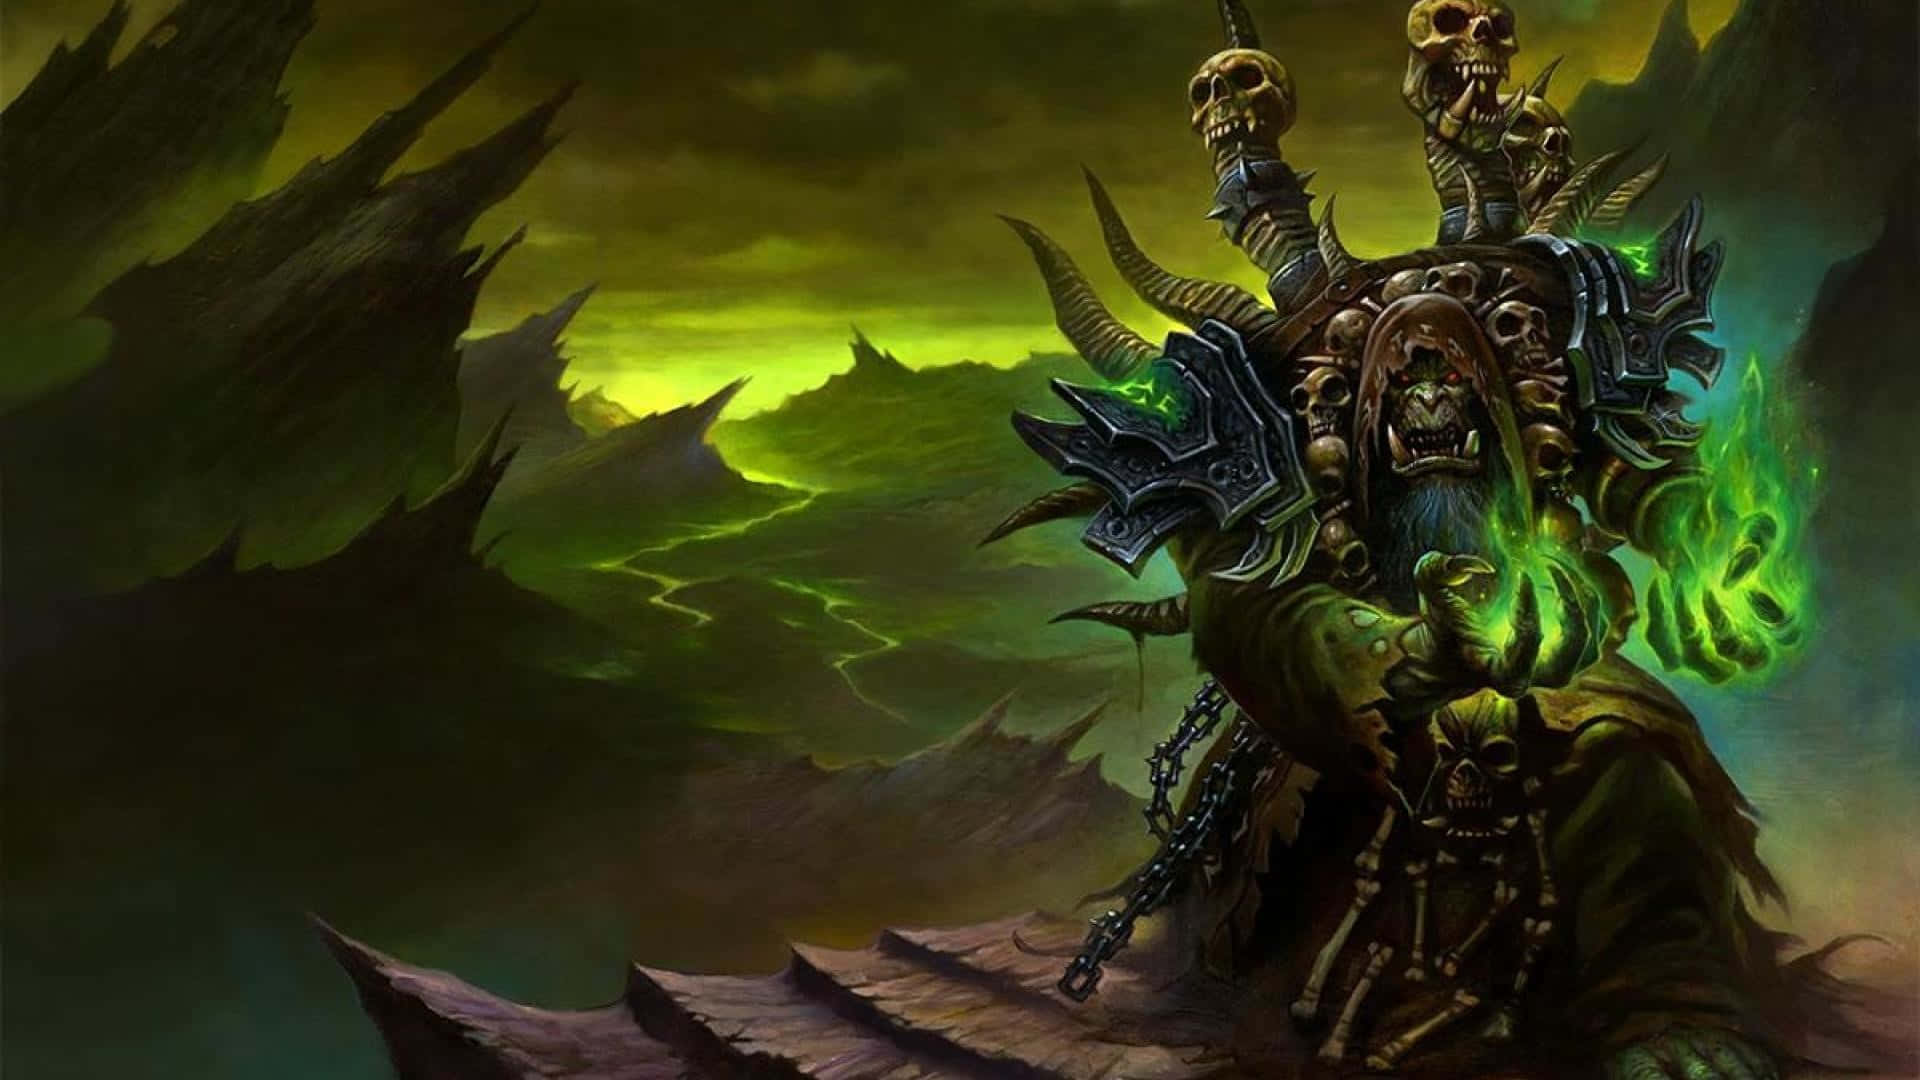 "Choose Your Path" with World of Warcraft. Wallpaper